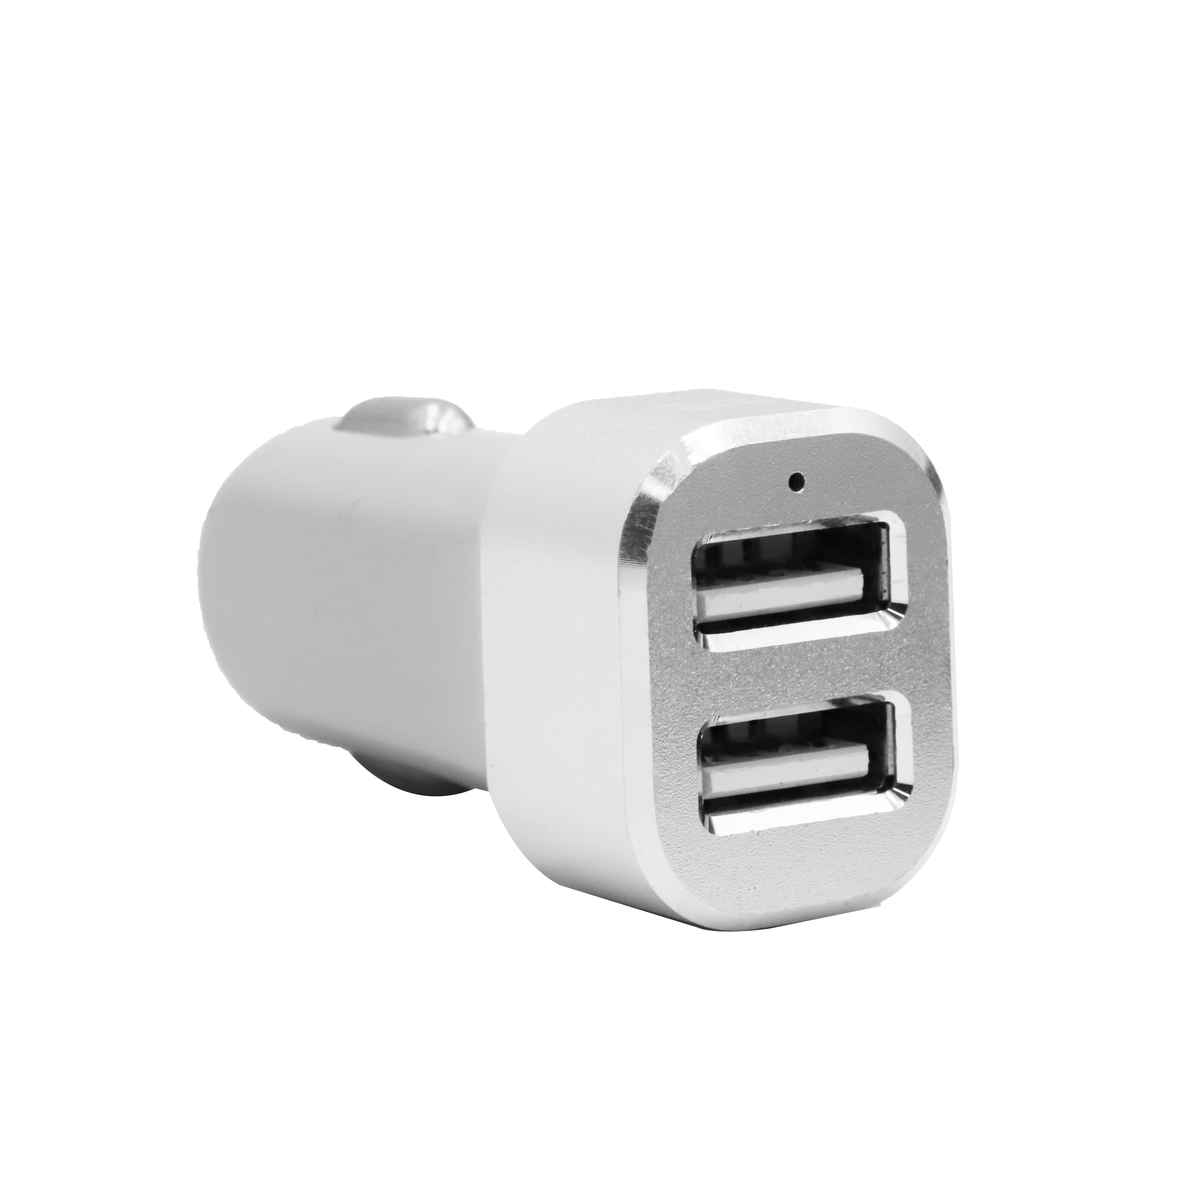 2. LM-395103 Dual USB Car Charger Bulk Purchase and Corporate purchase from China Union Power -Description-